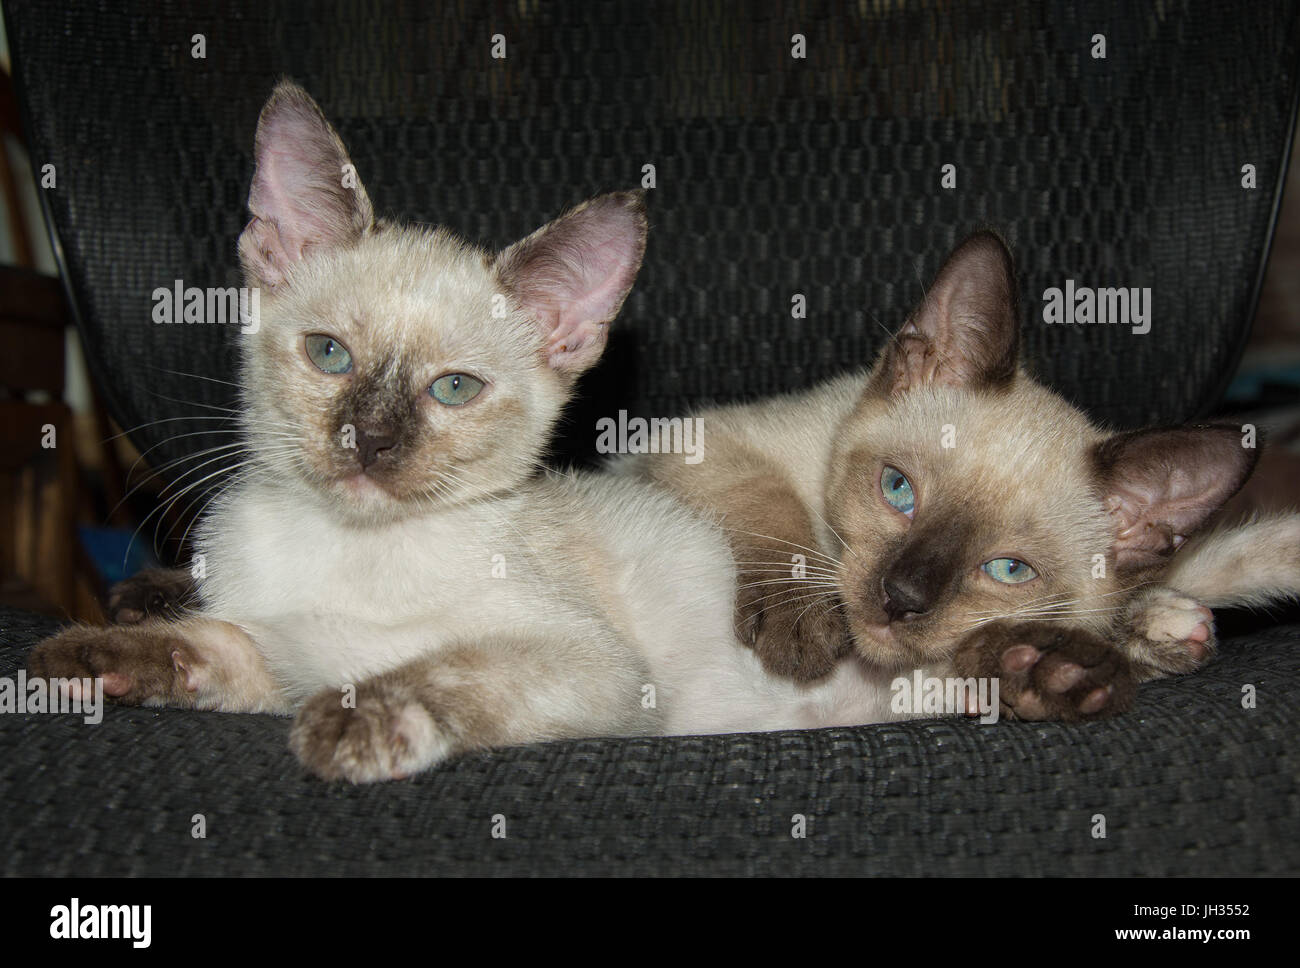 Two adorable Siamese kittens resting on a chair Stock Photo